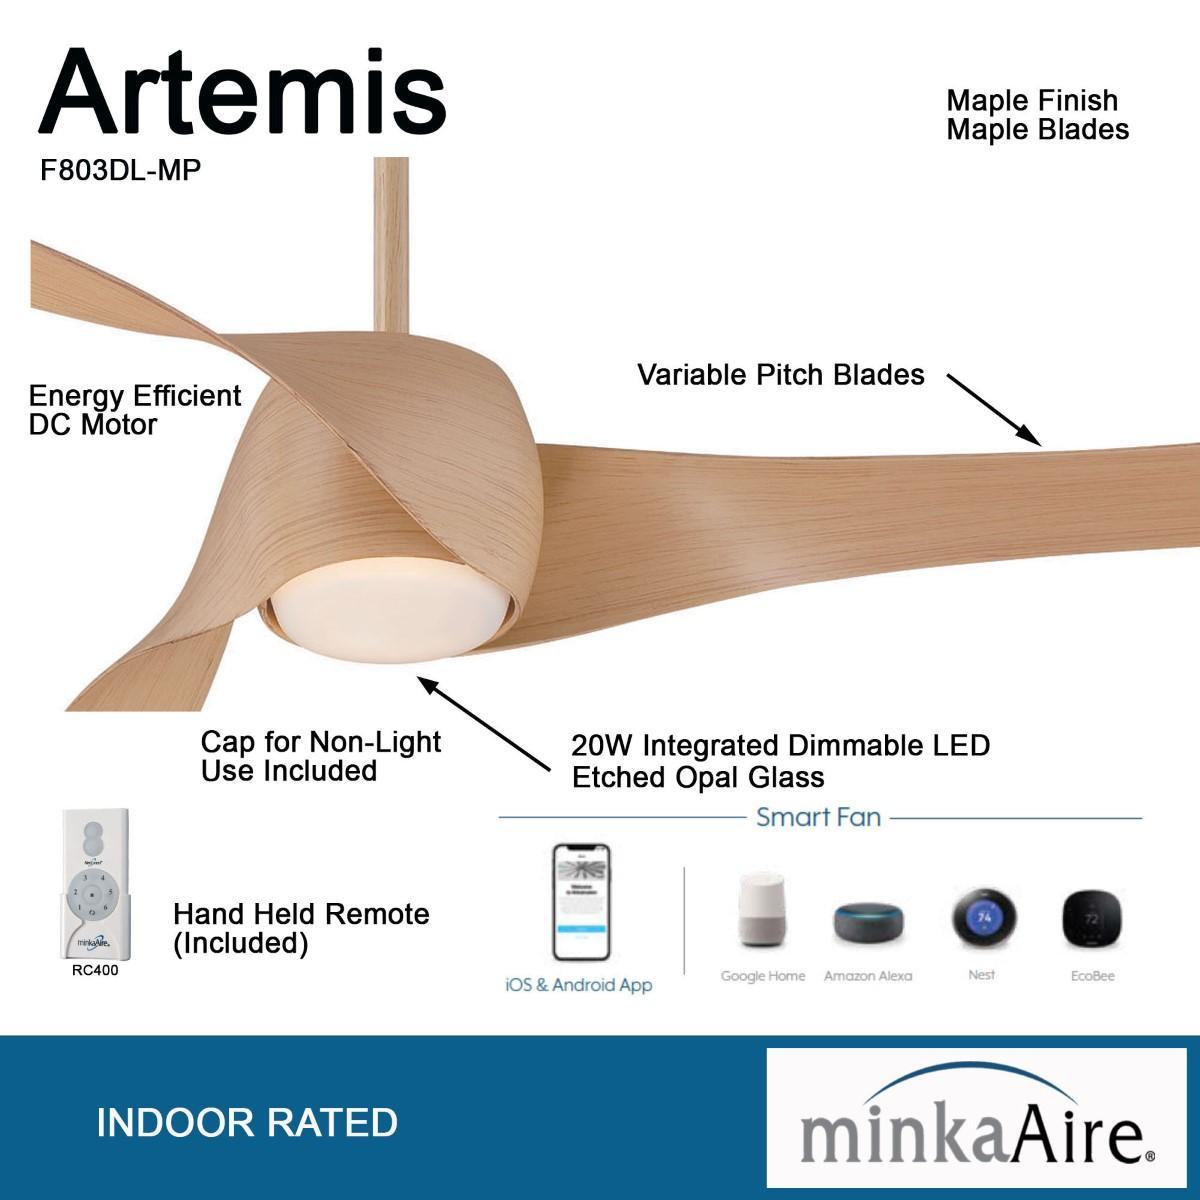 Artemis 58 Inch Modern Propeller Smart Ceiling Fan With Light And Remote